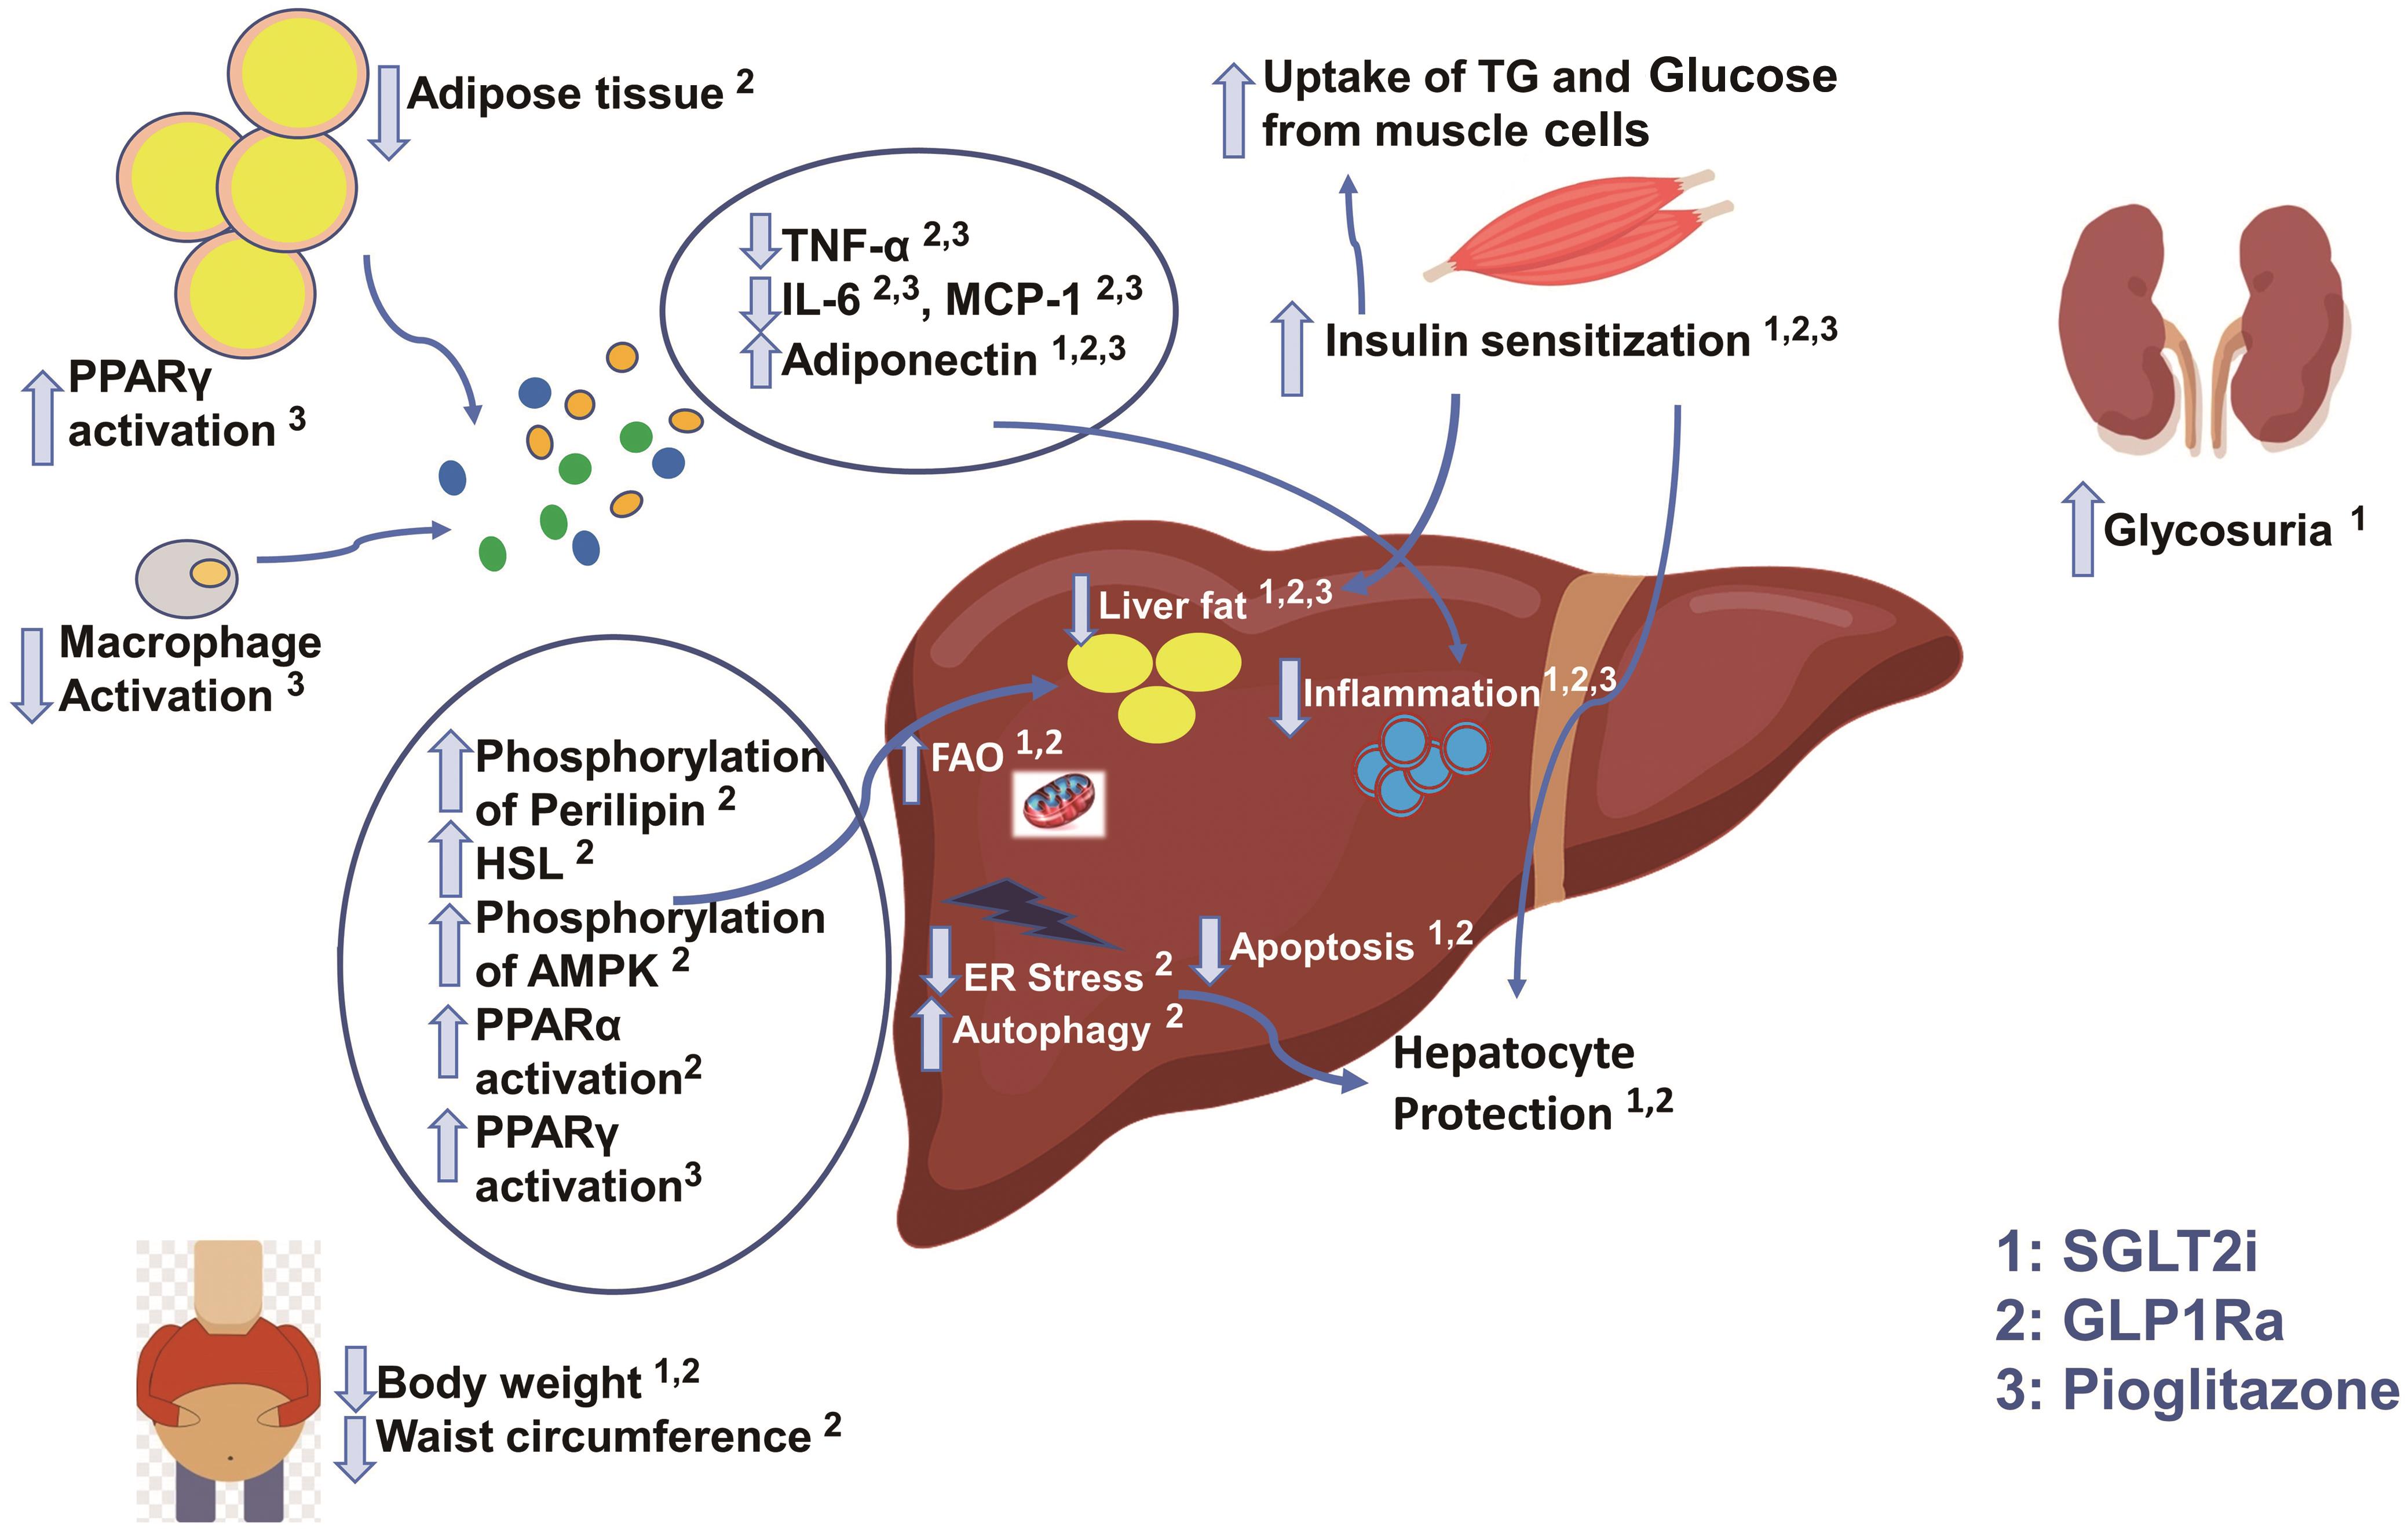 Examples of possible mechanisms of NAFLD amelioration through current antidiabetic treatment.